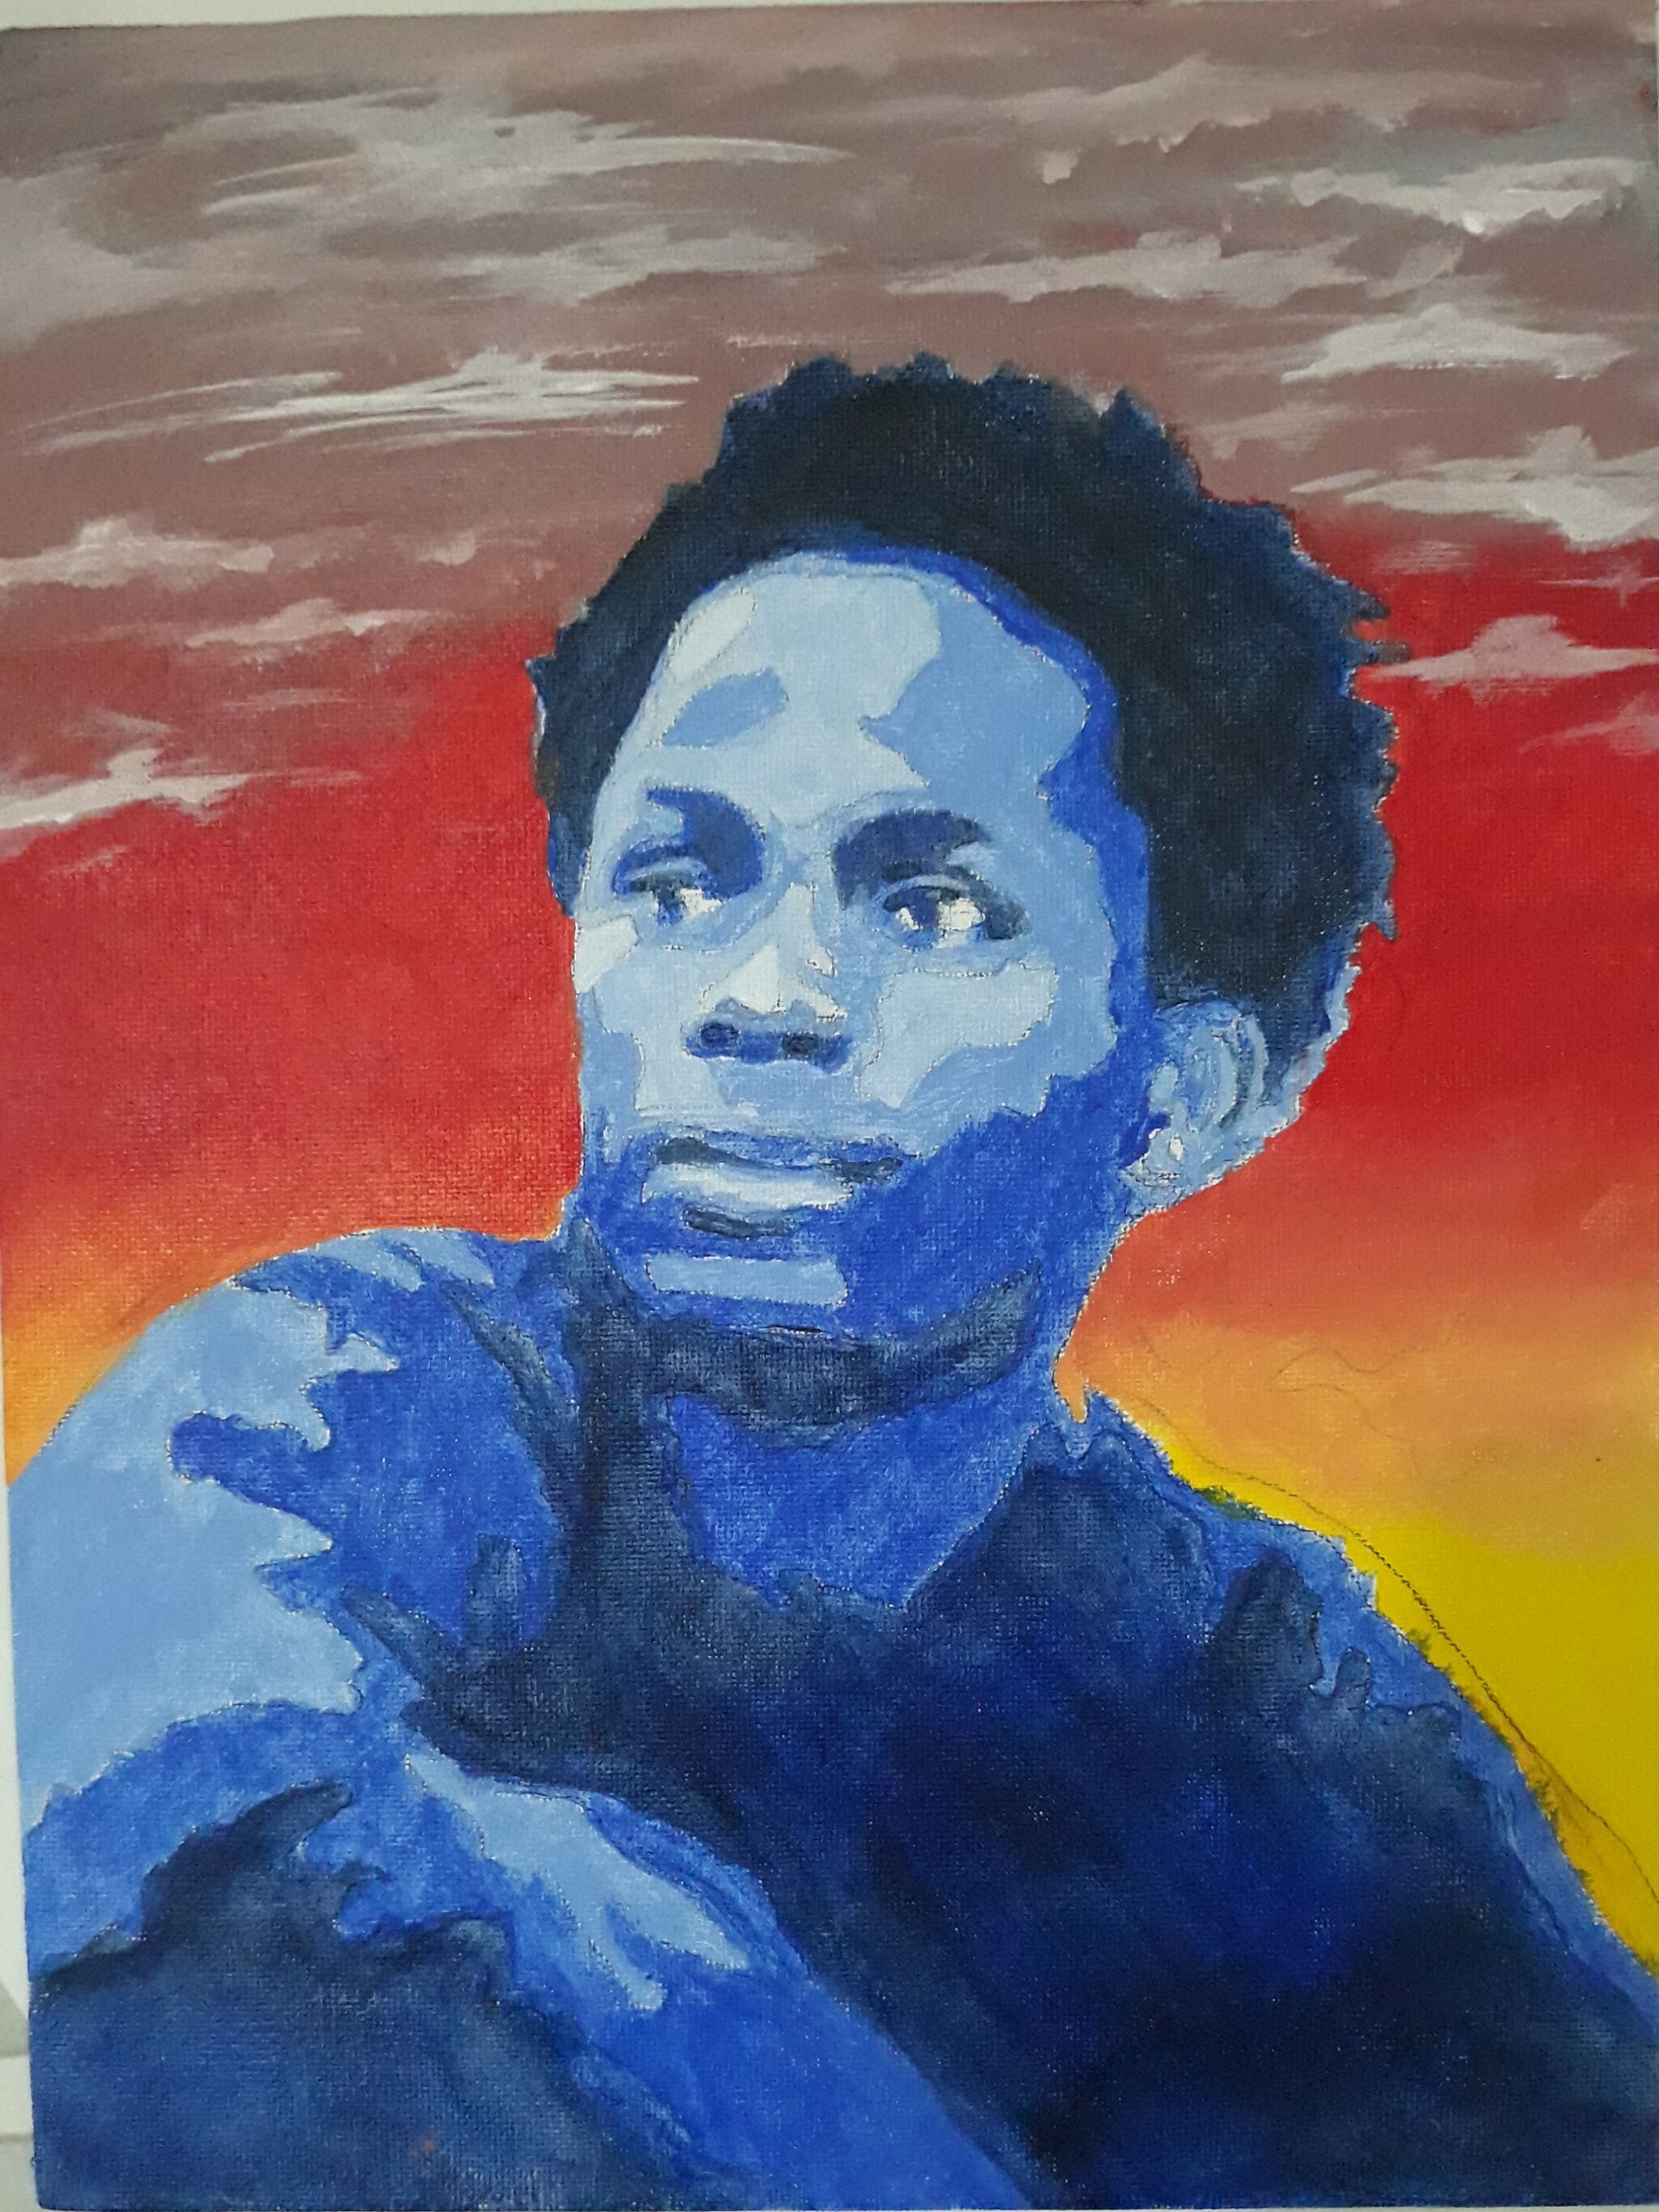 A portrait of Ishmael Beah against an orange and yellow background. 